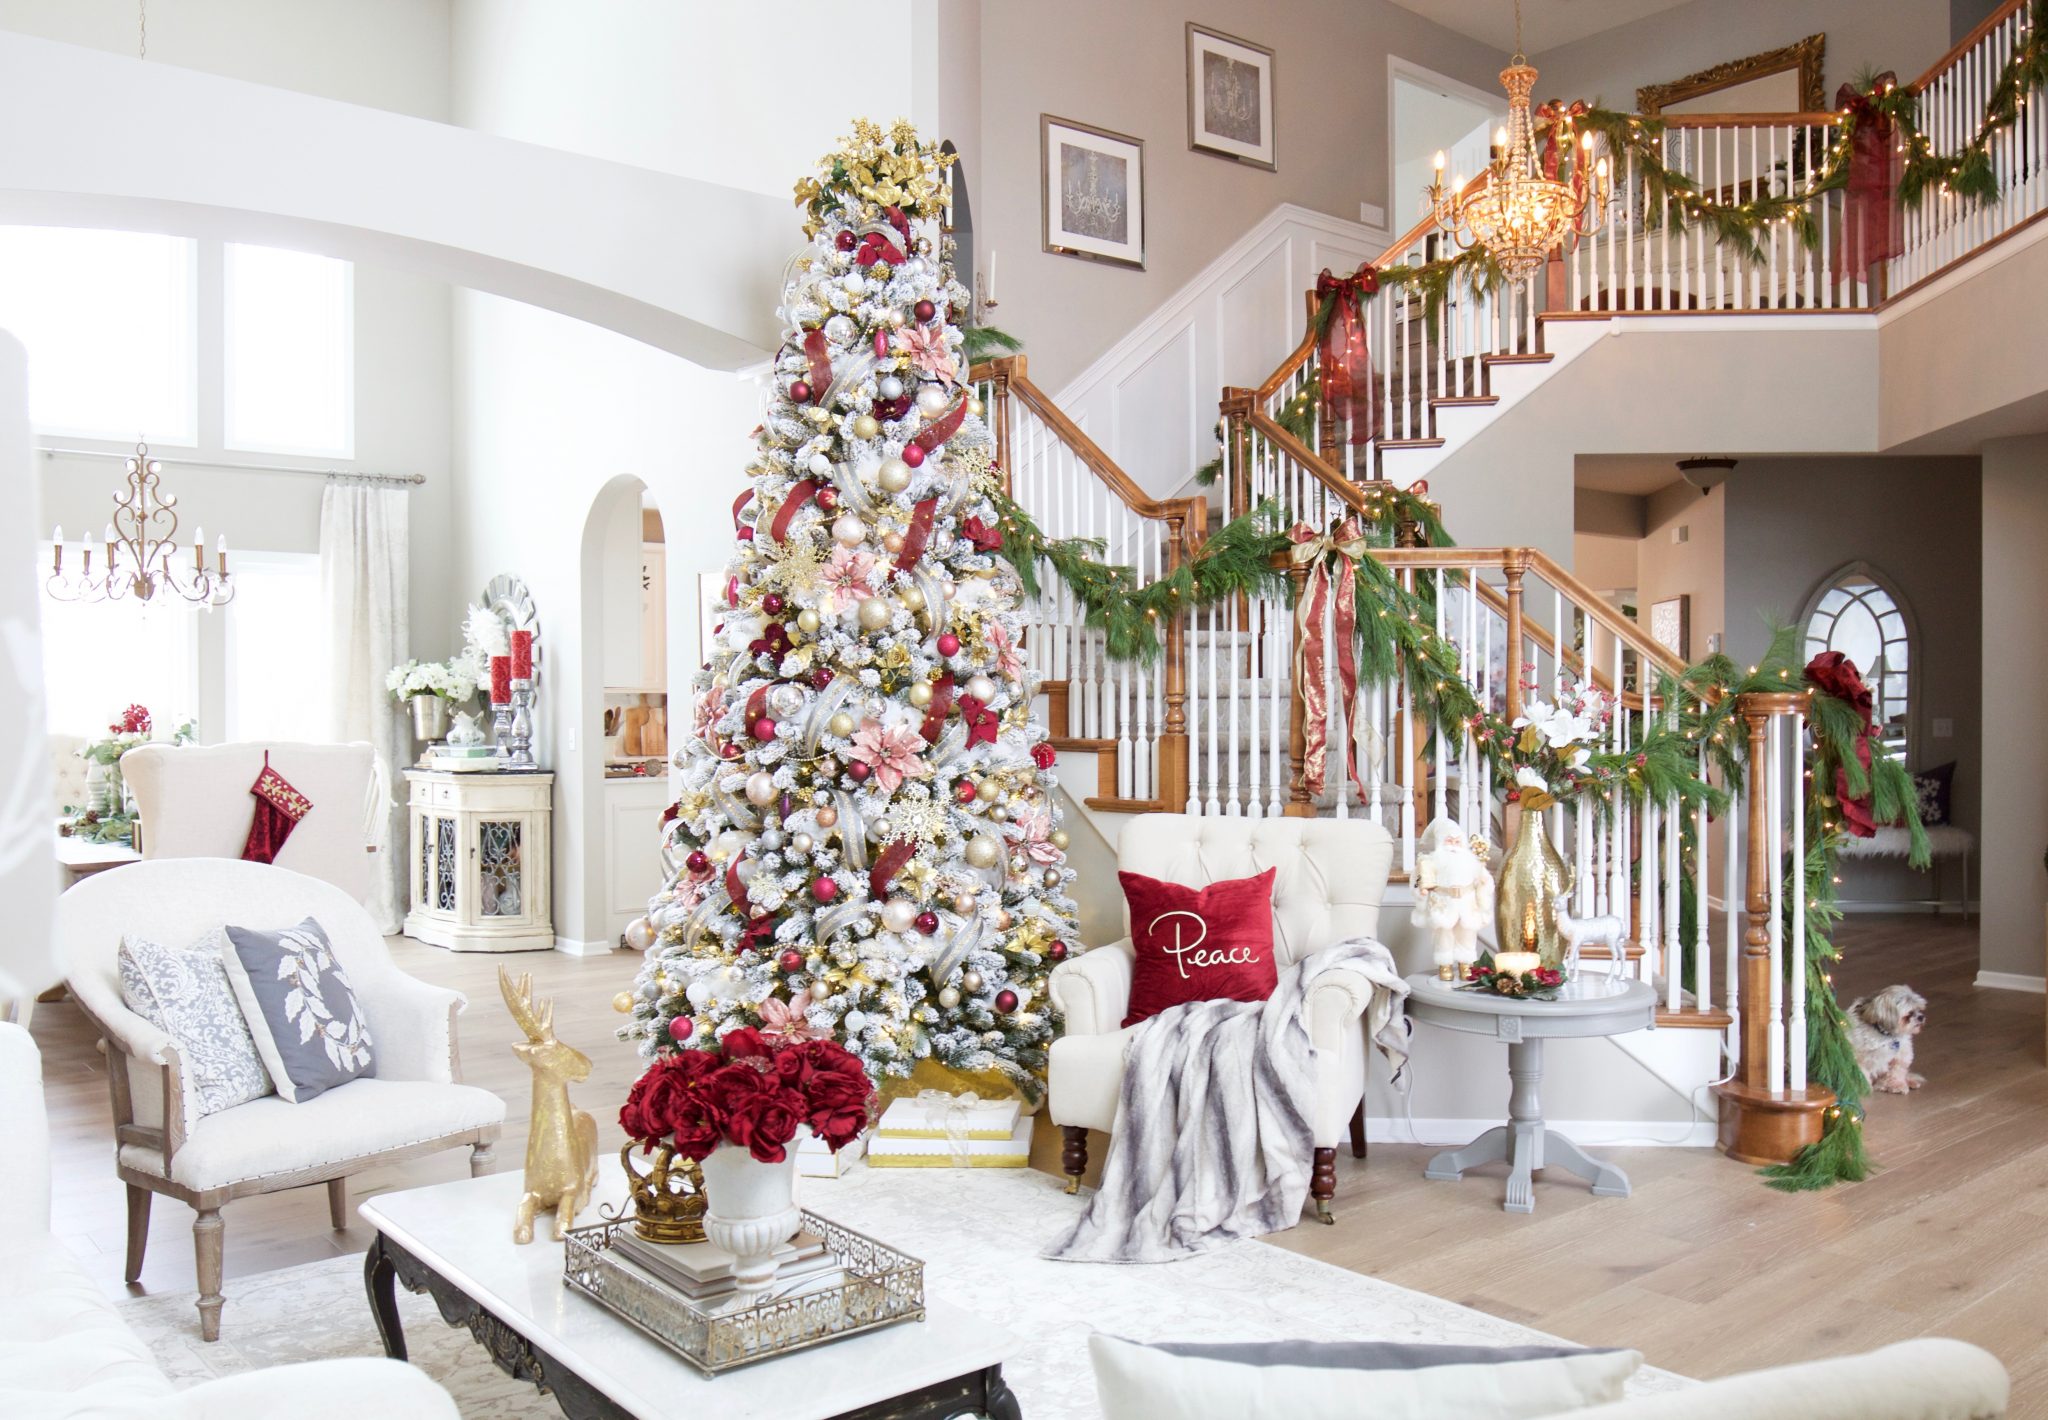 When is the Best Time to Buy Christmas Decorations? - Nadine De Leon